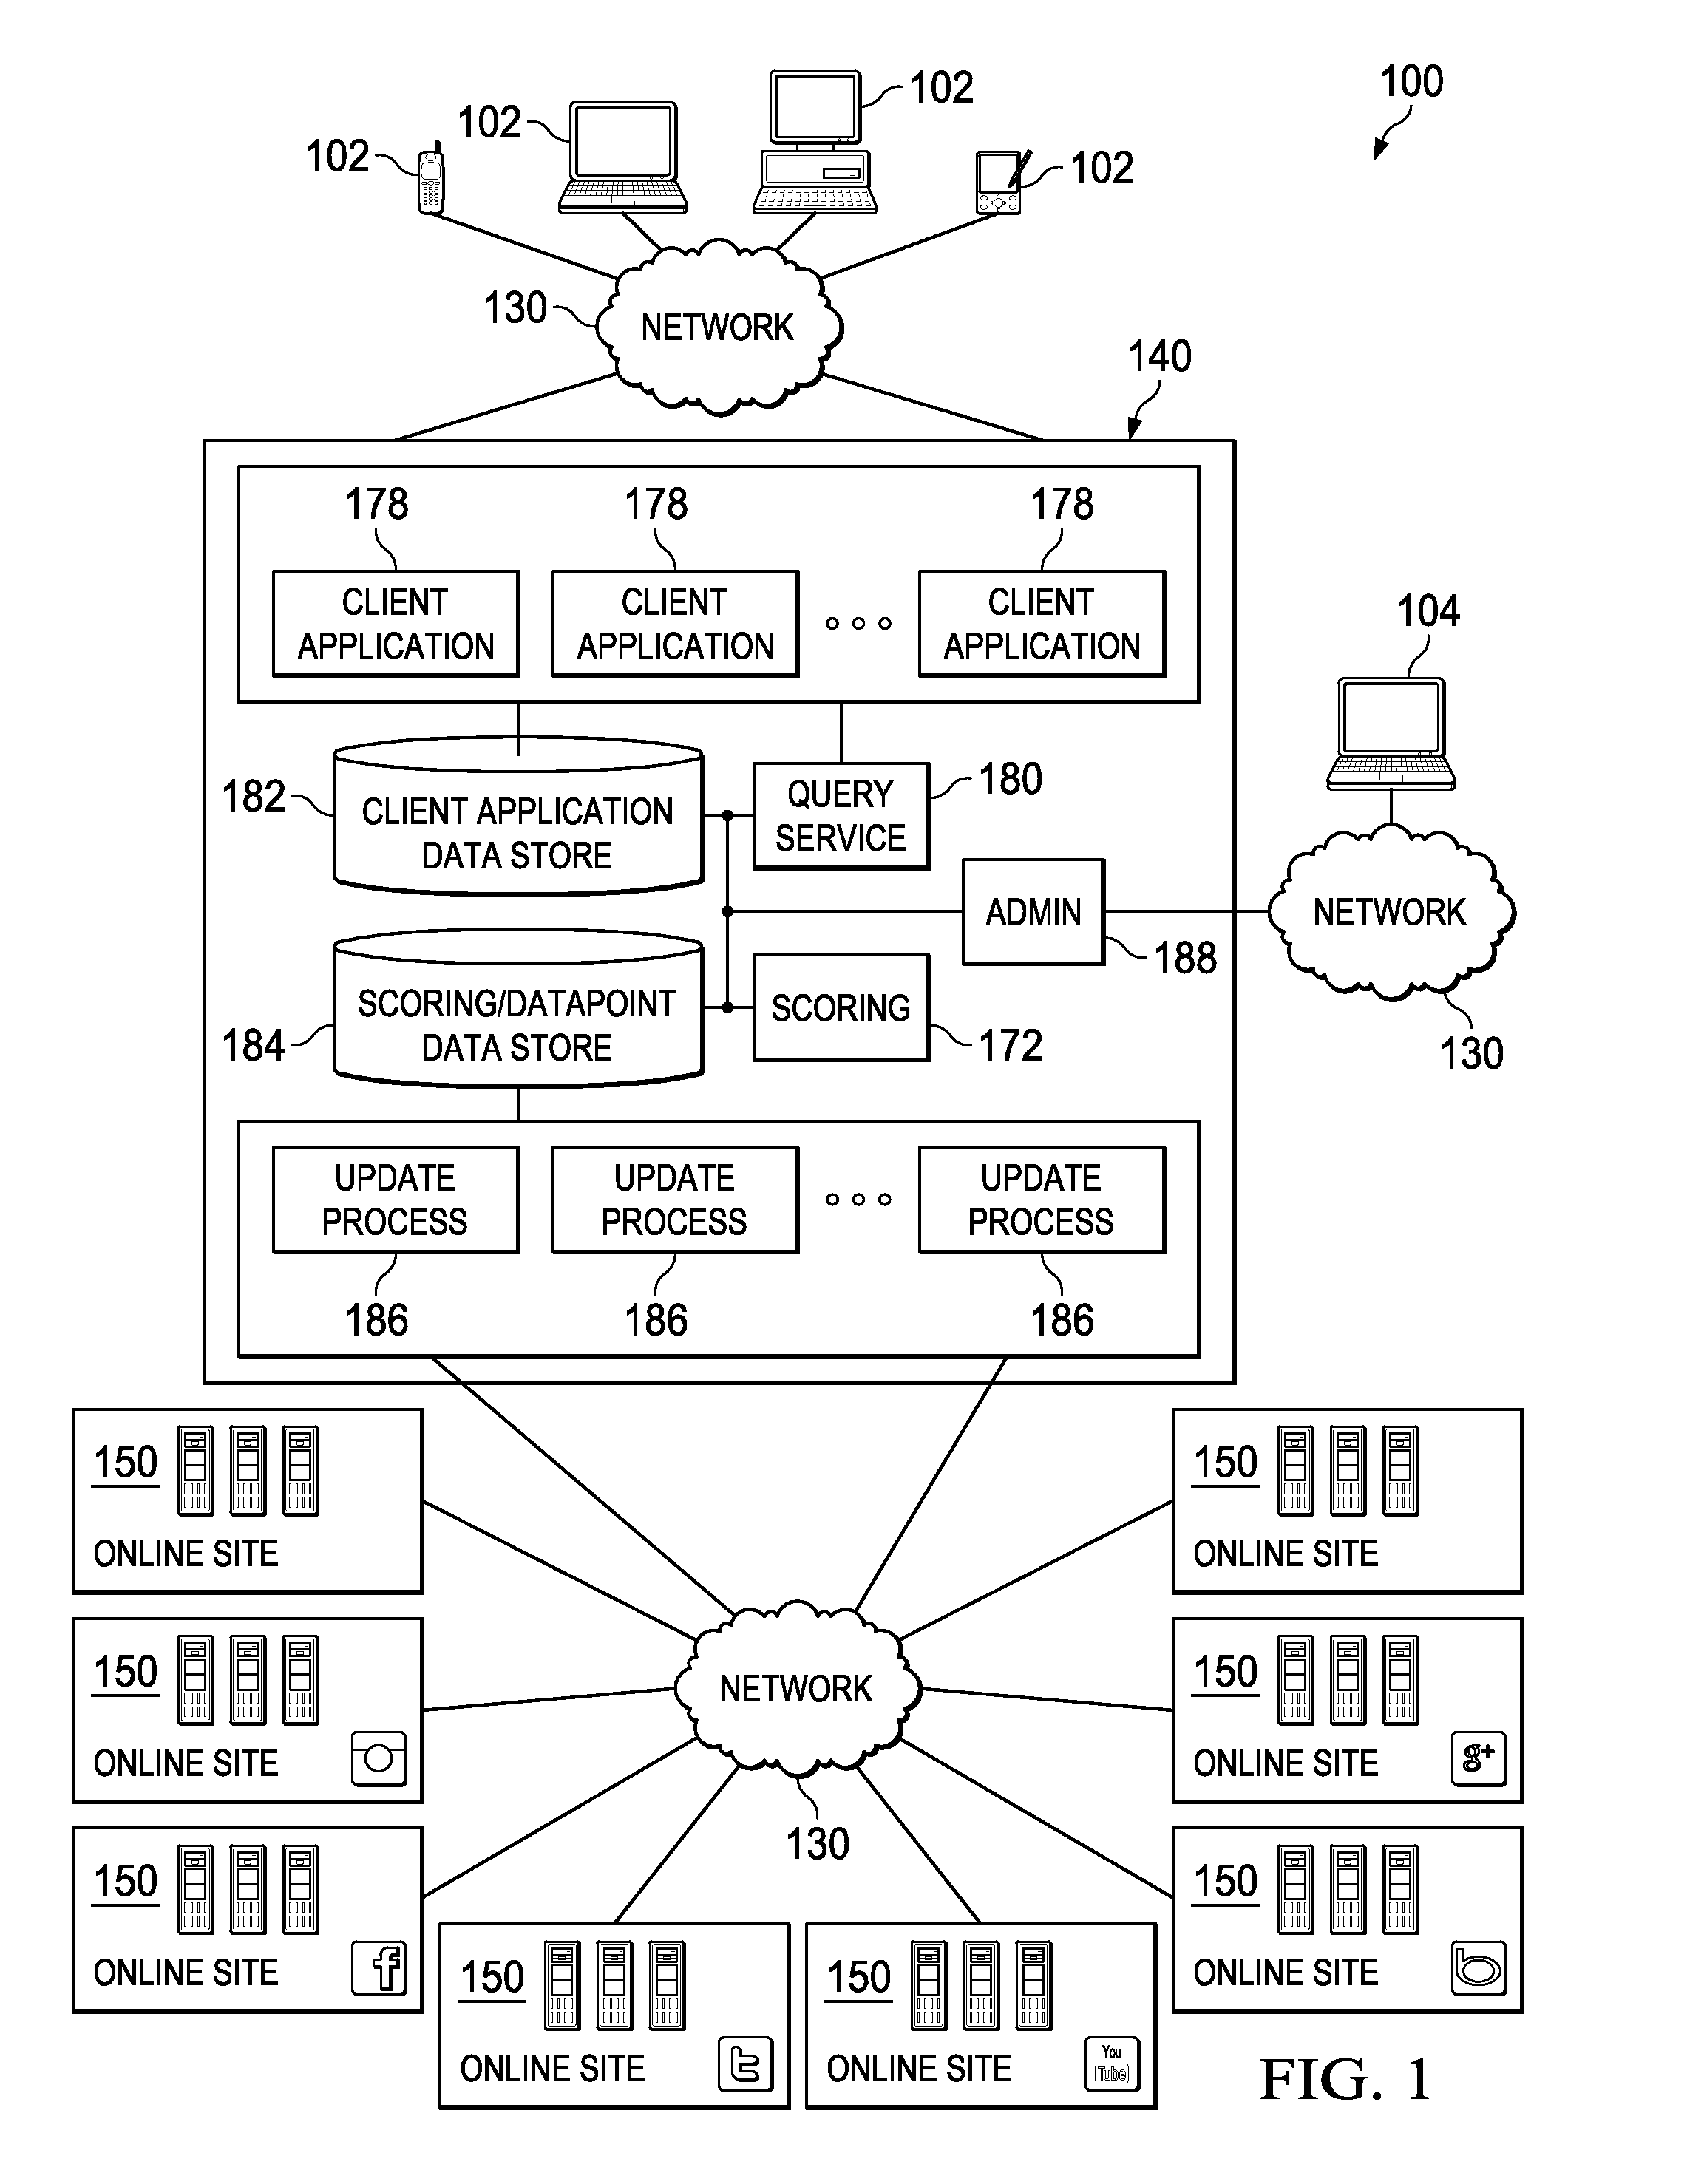 System and apparatus for assessing reach, engagement, conversation or other social metrics based on domain tailored evaluation of social media exposure